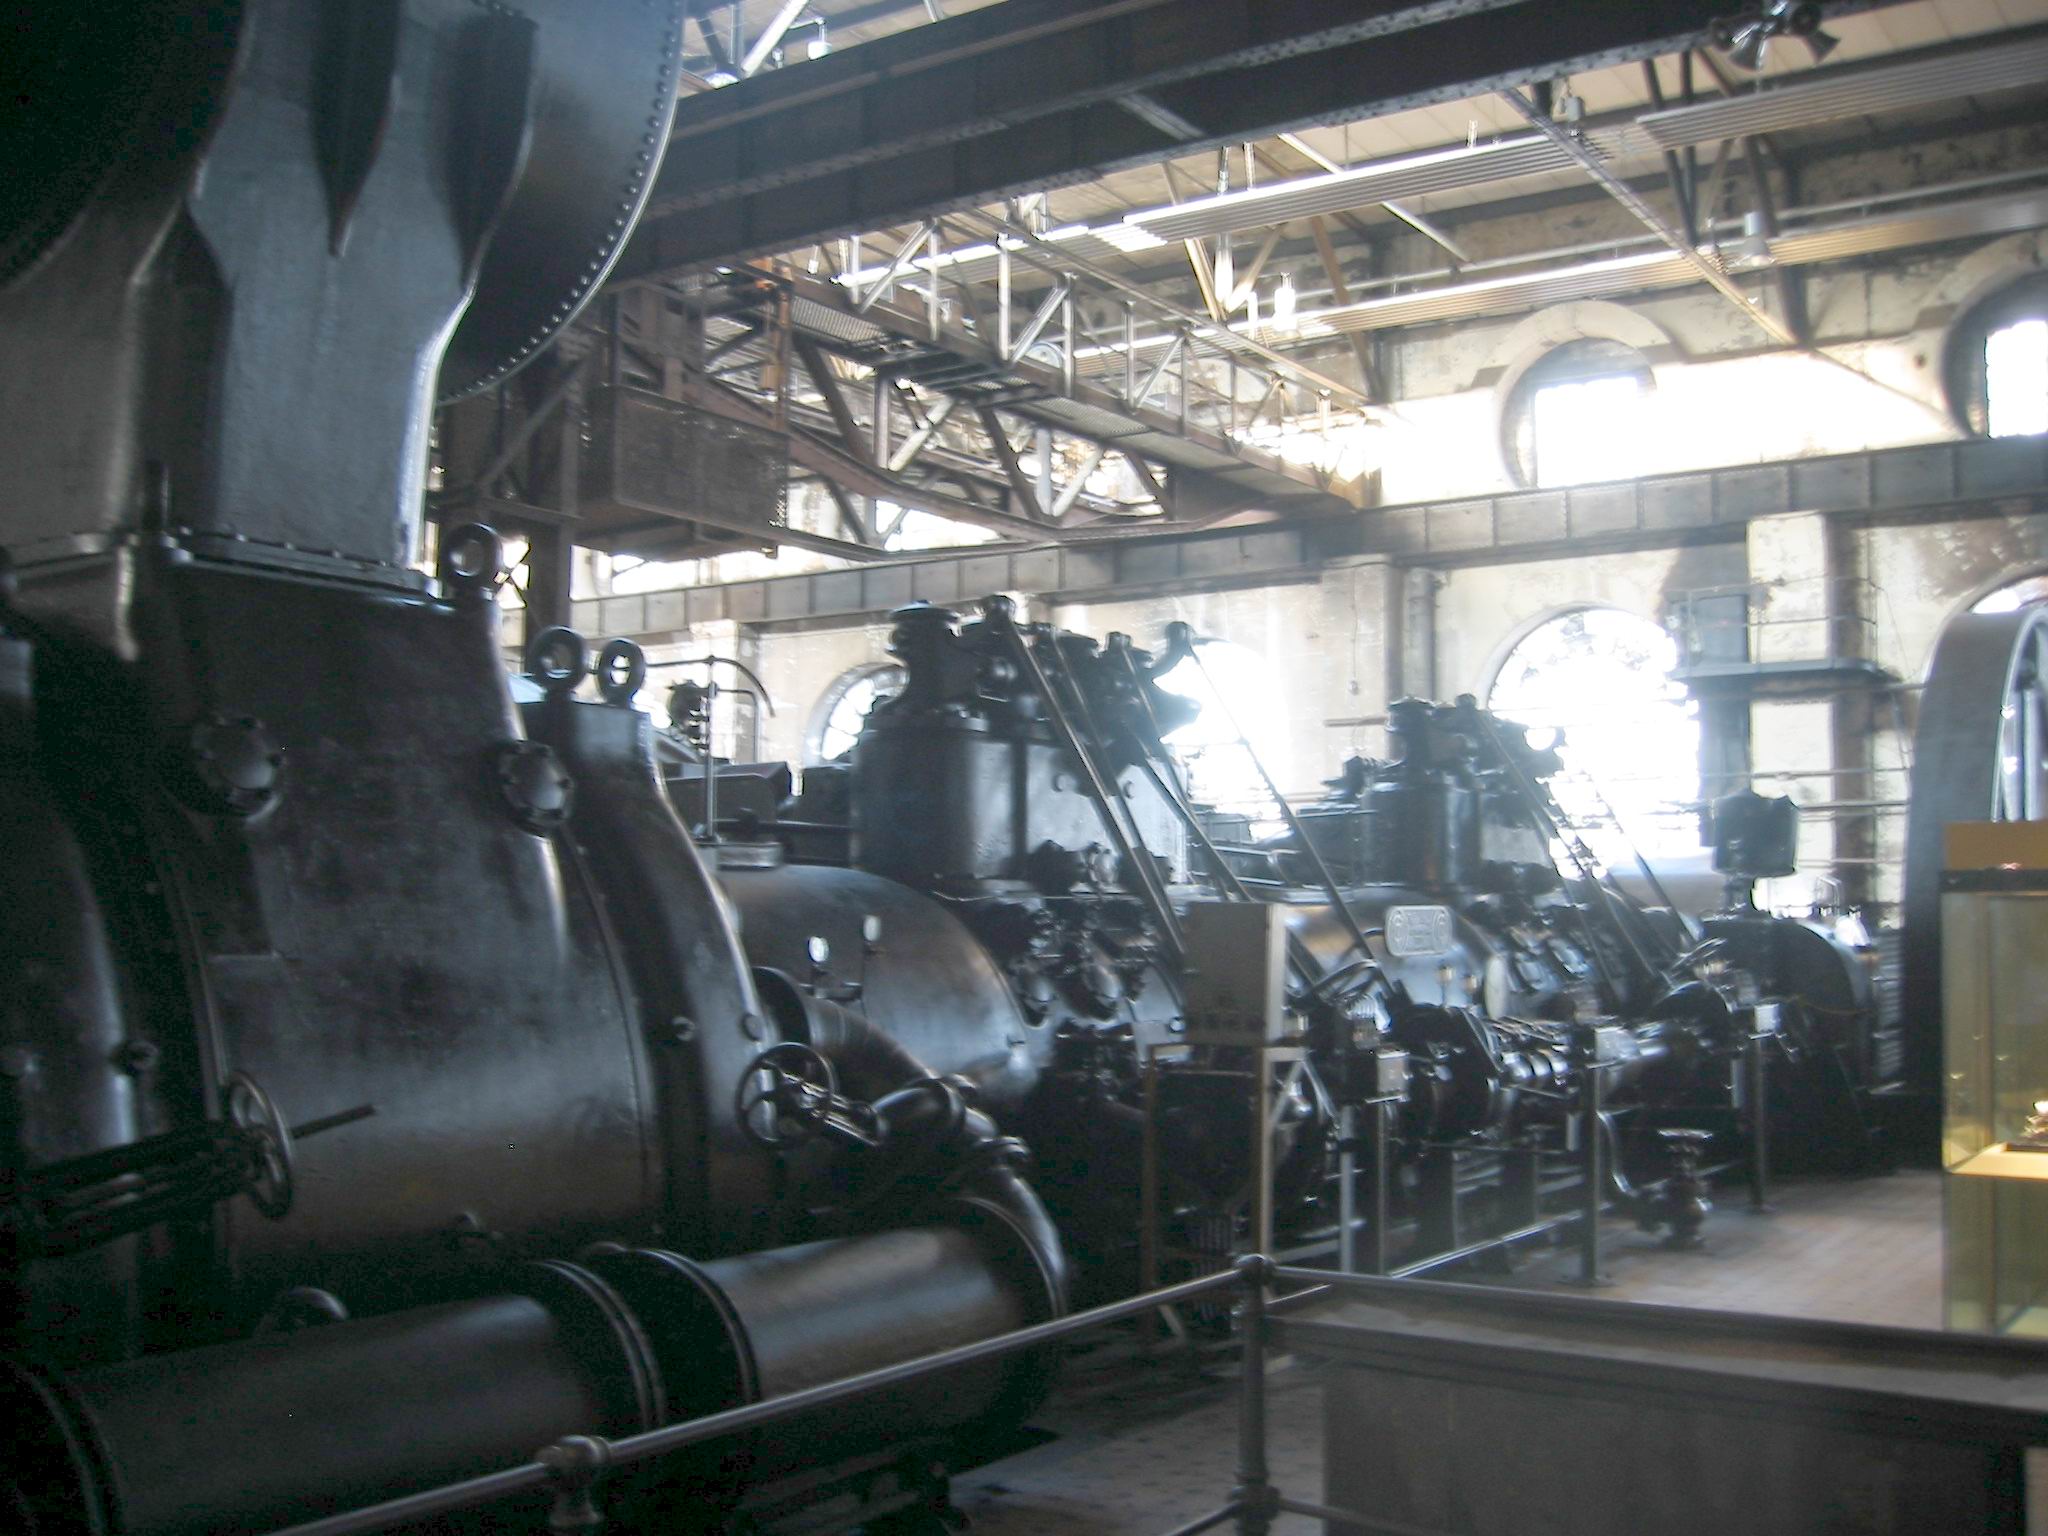 Another view of the machinery in the V�lklingen Ironworks.